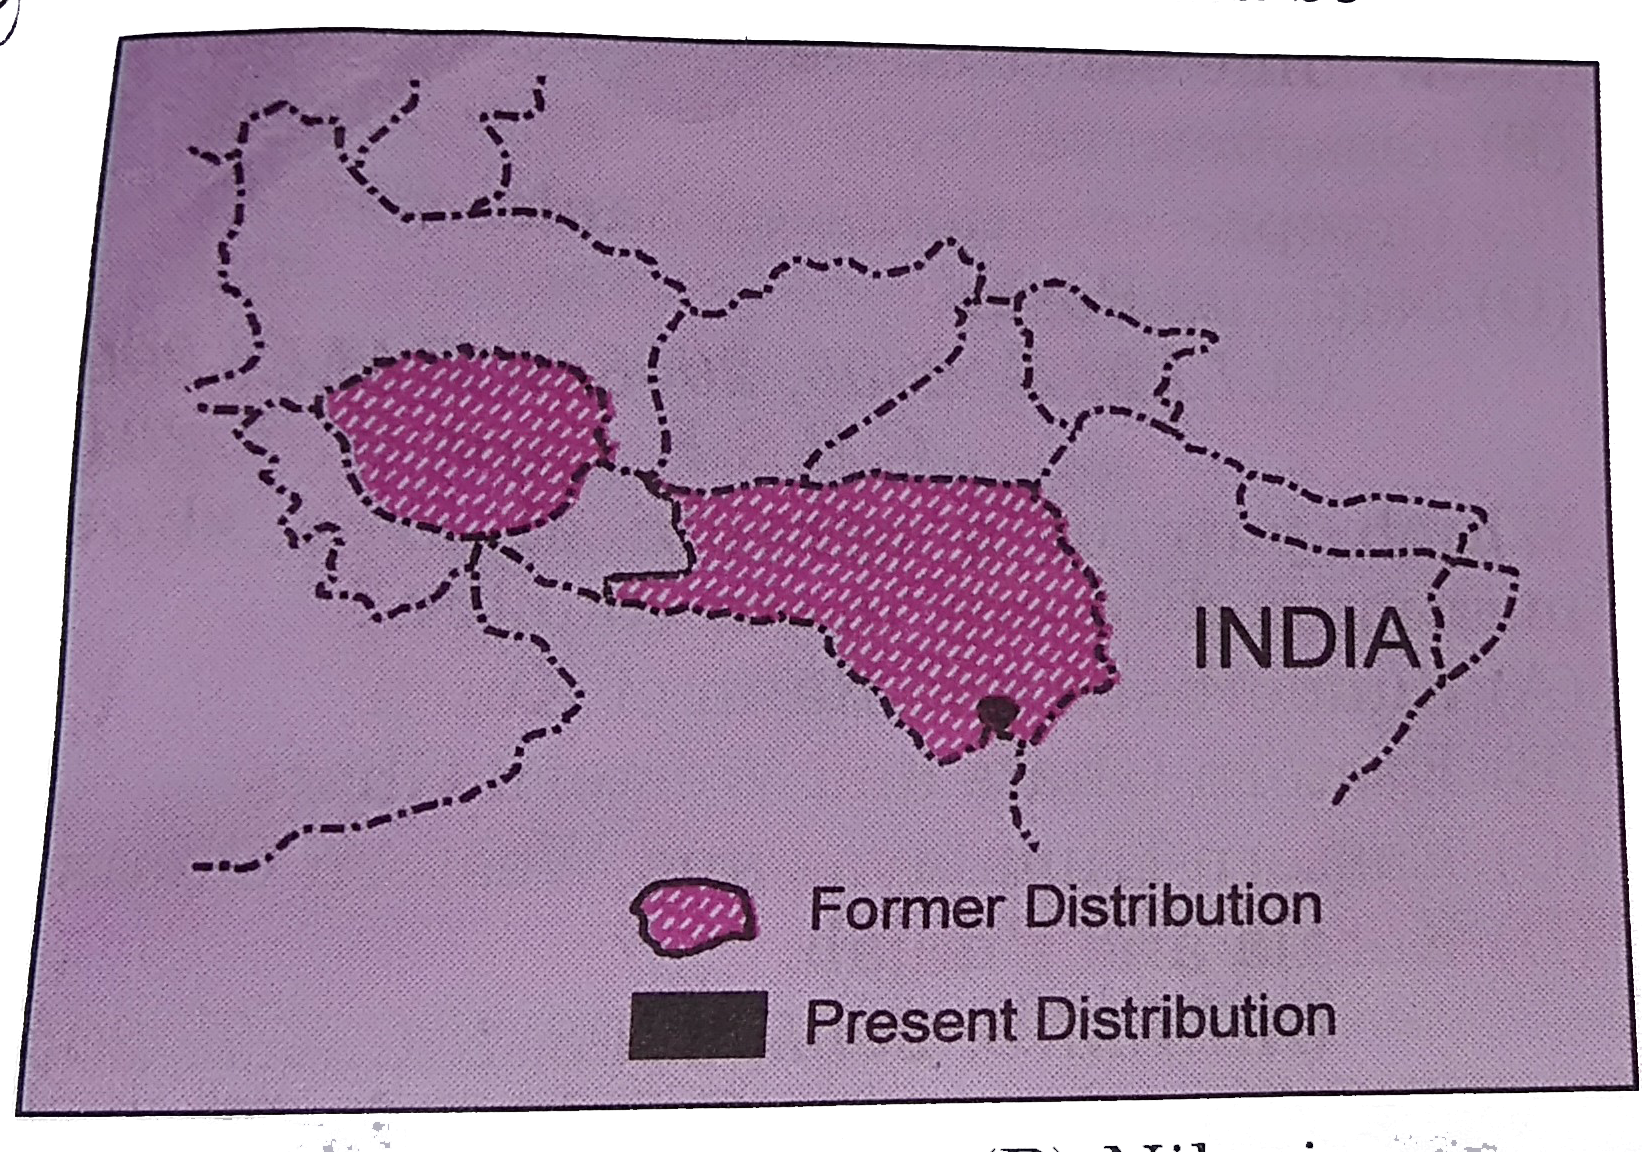 The map gives the former and present distribution. Which one it could be